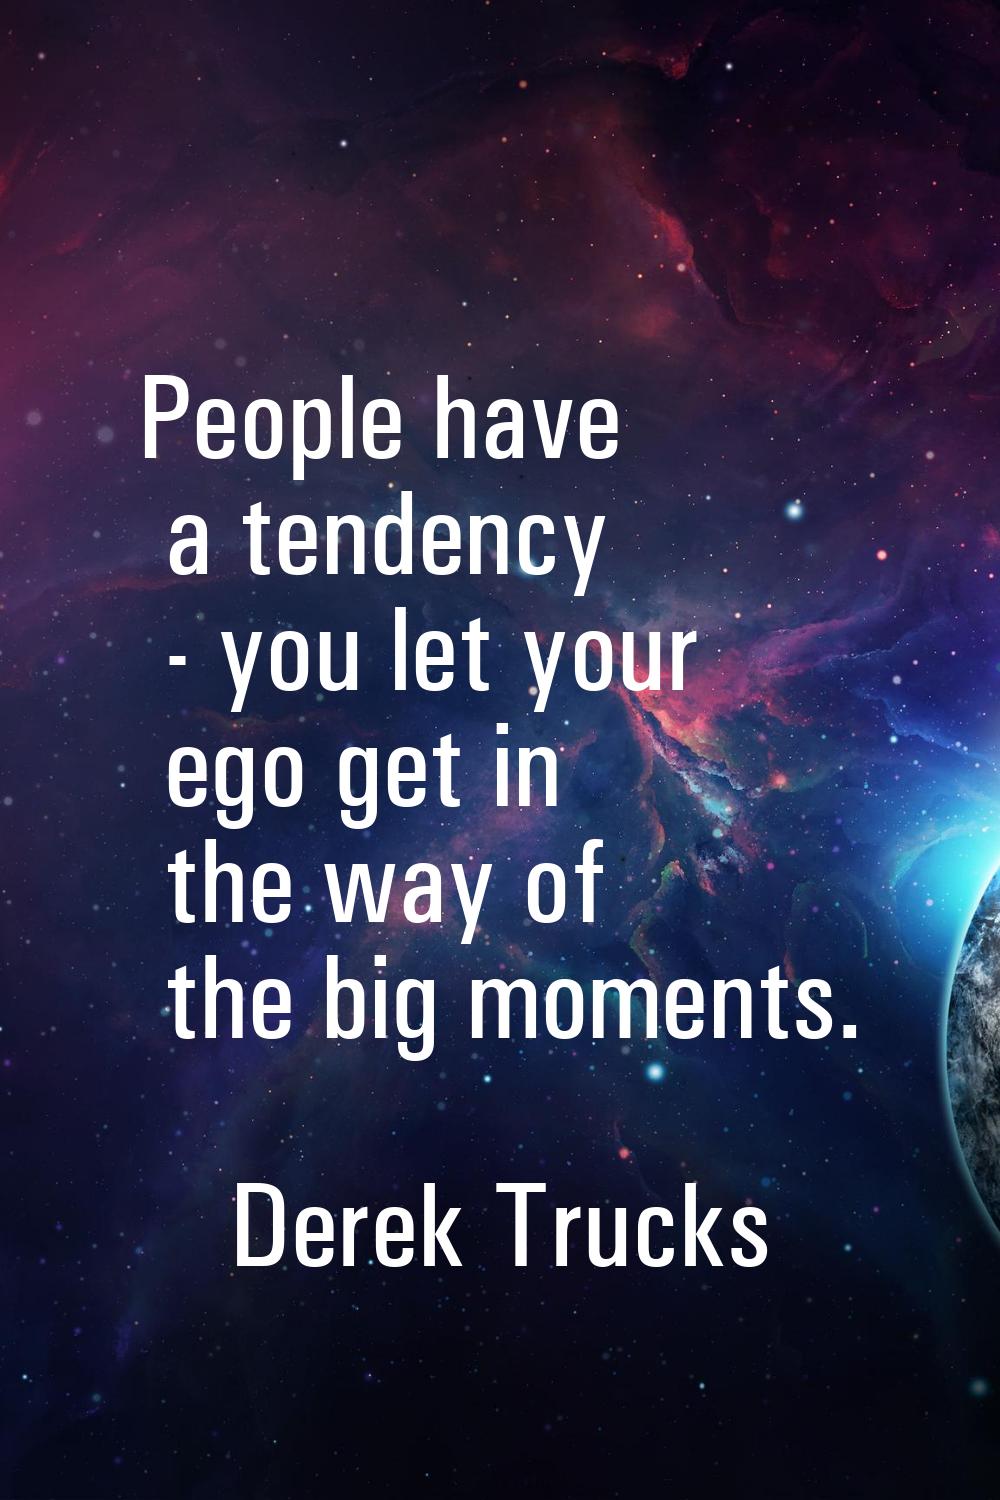 People have a tendency - you let your ego get in the way of the big moments.